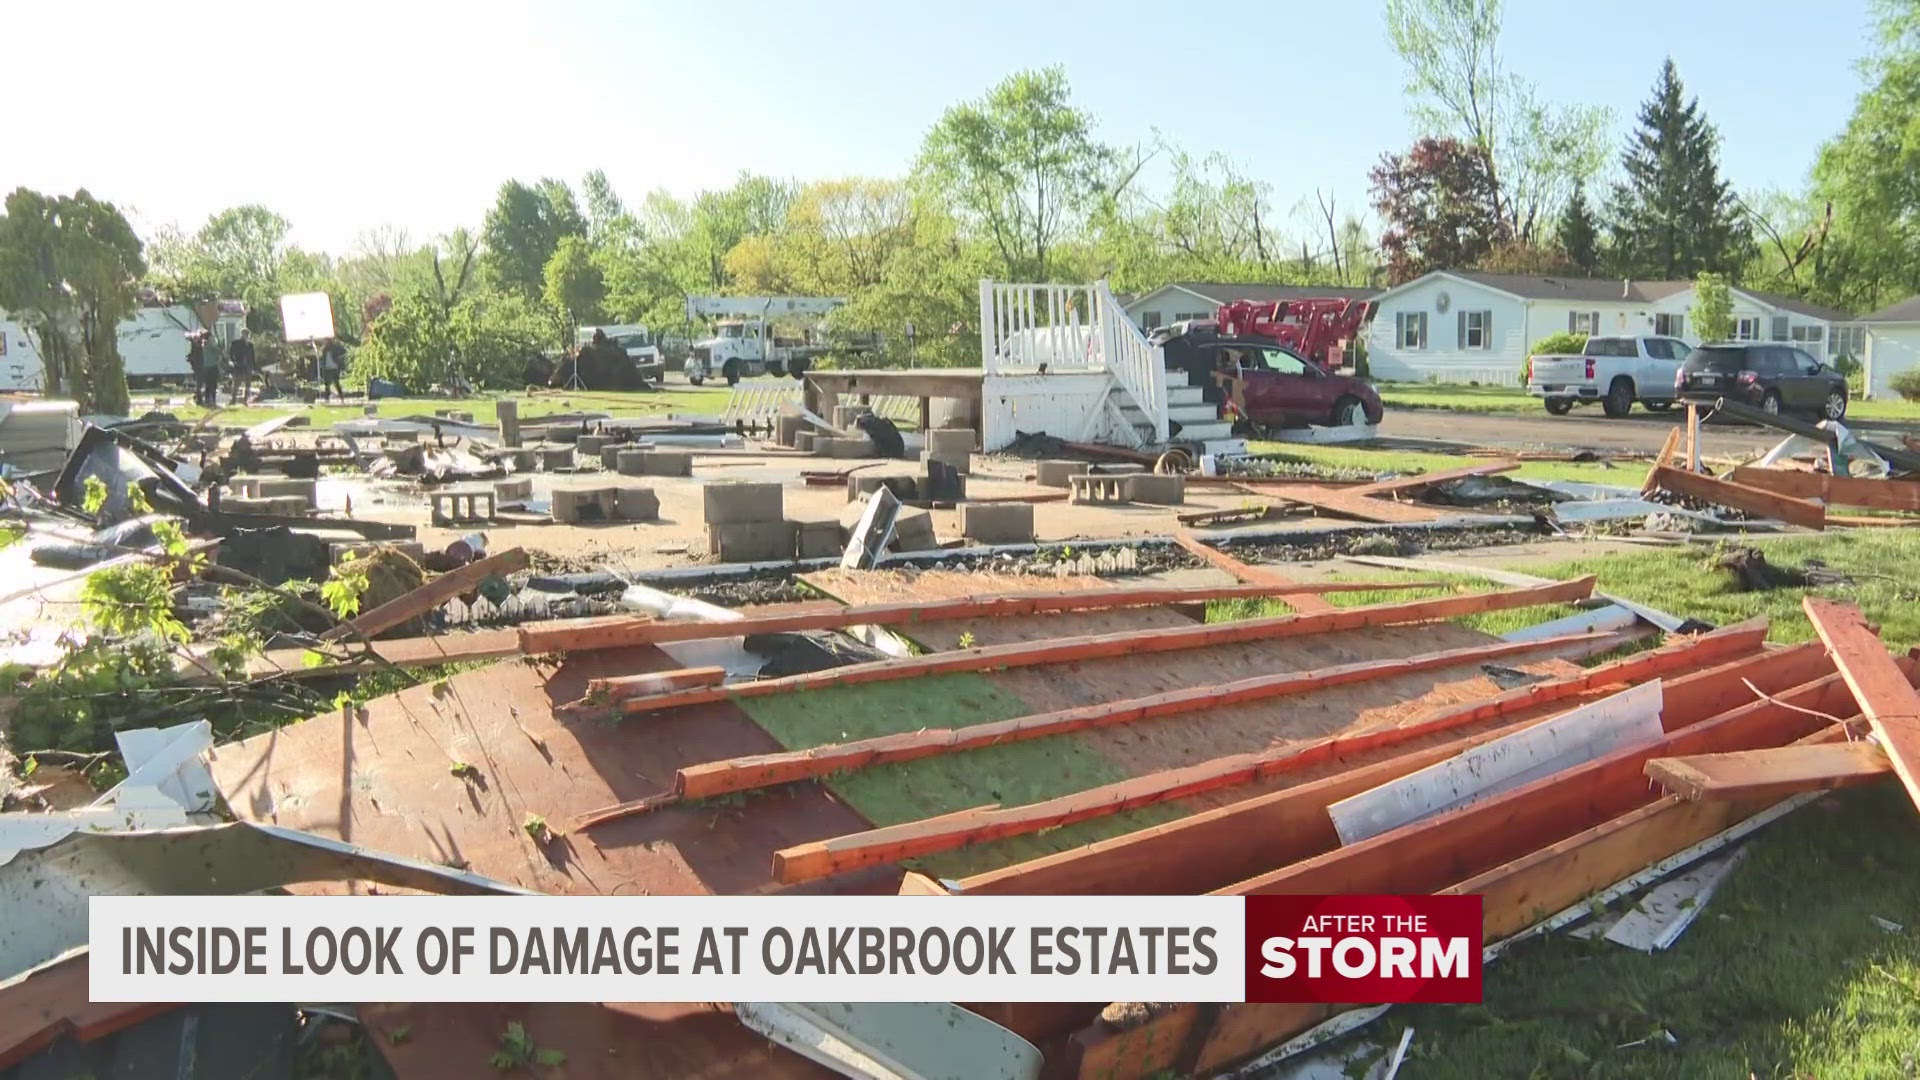 Southwest Michigan is waking up to destroyed homes, trees torn up from their roots and power outages after severe weather spun up multiple tornadoes.